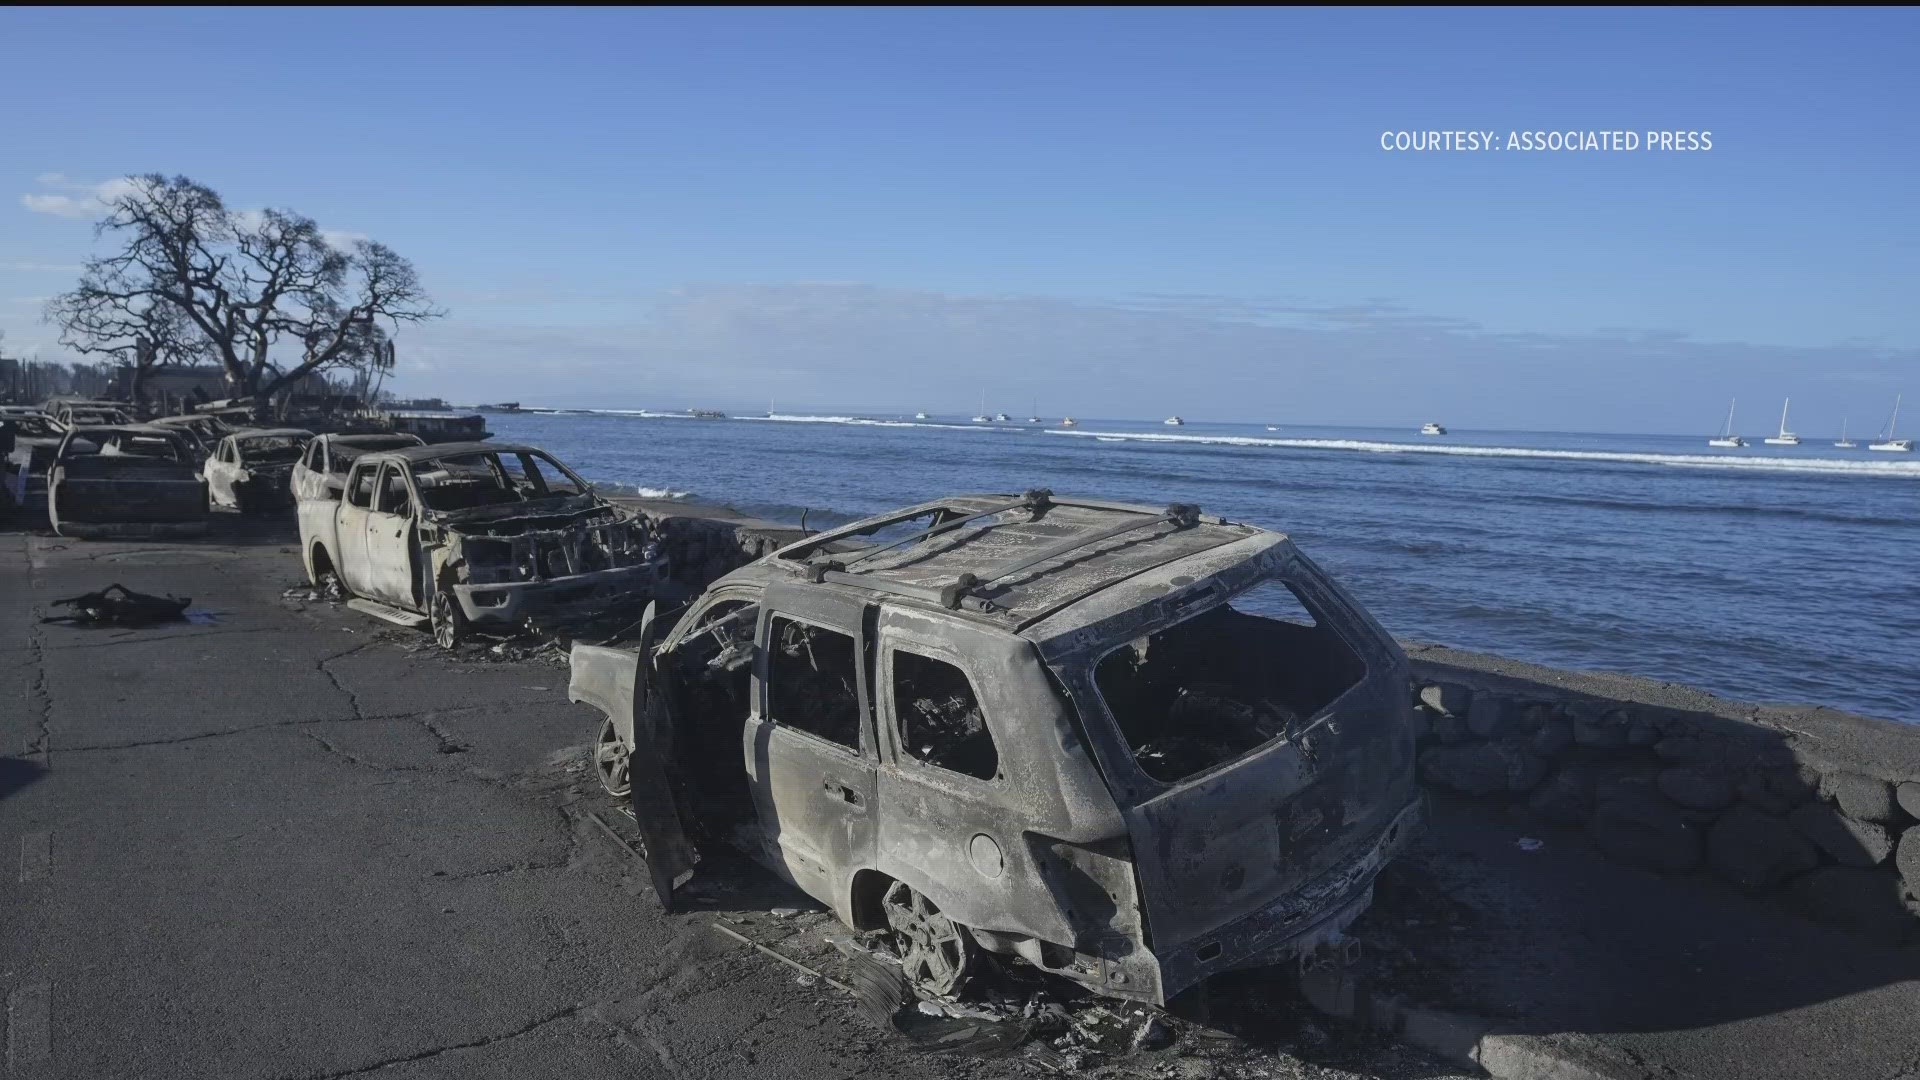 Megan Hedley talks about the beauty of Lahaina after losing everything in the fires.